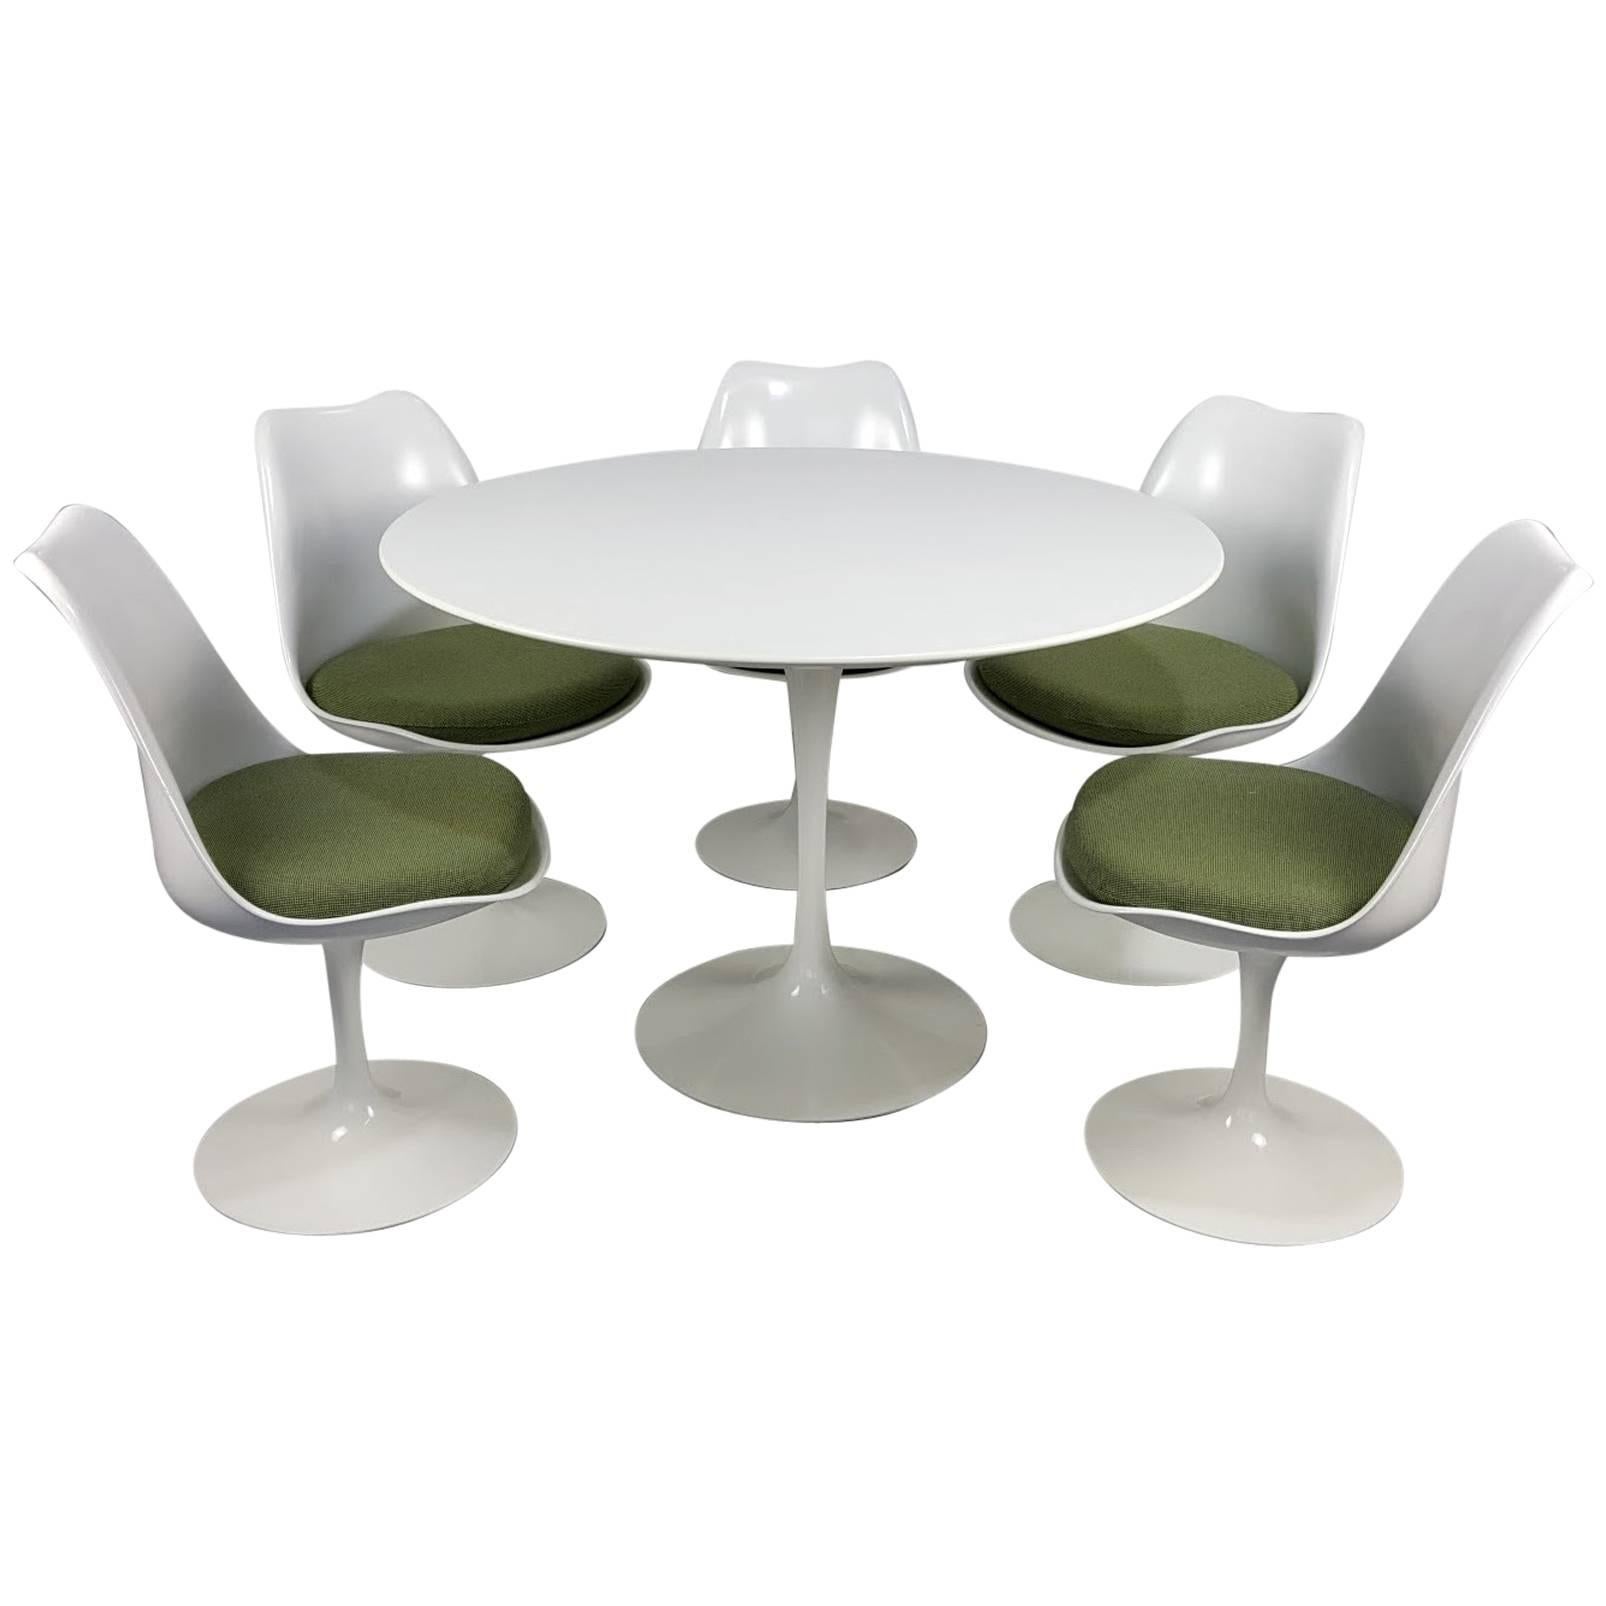 Eero Saarinen Tulip Table and Chairs by Knoll, Newer Production